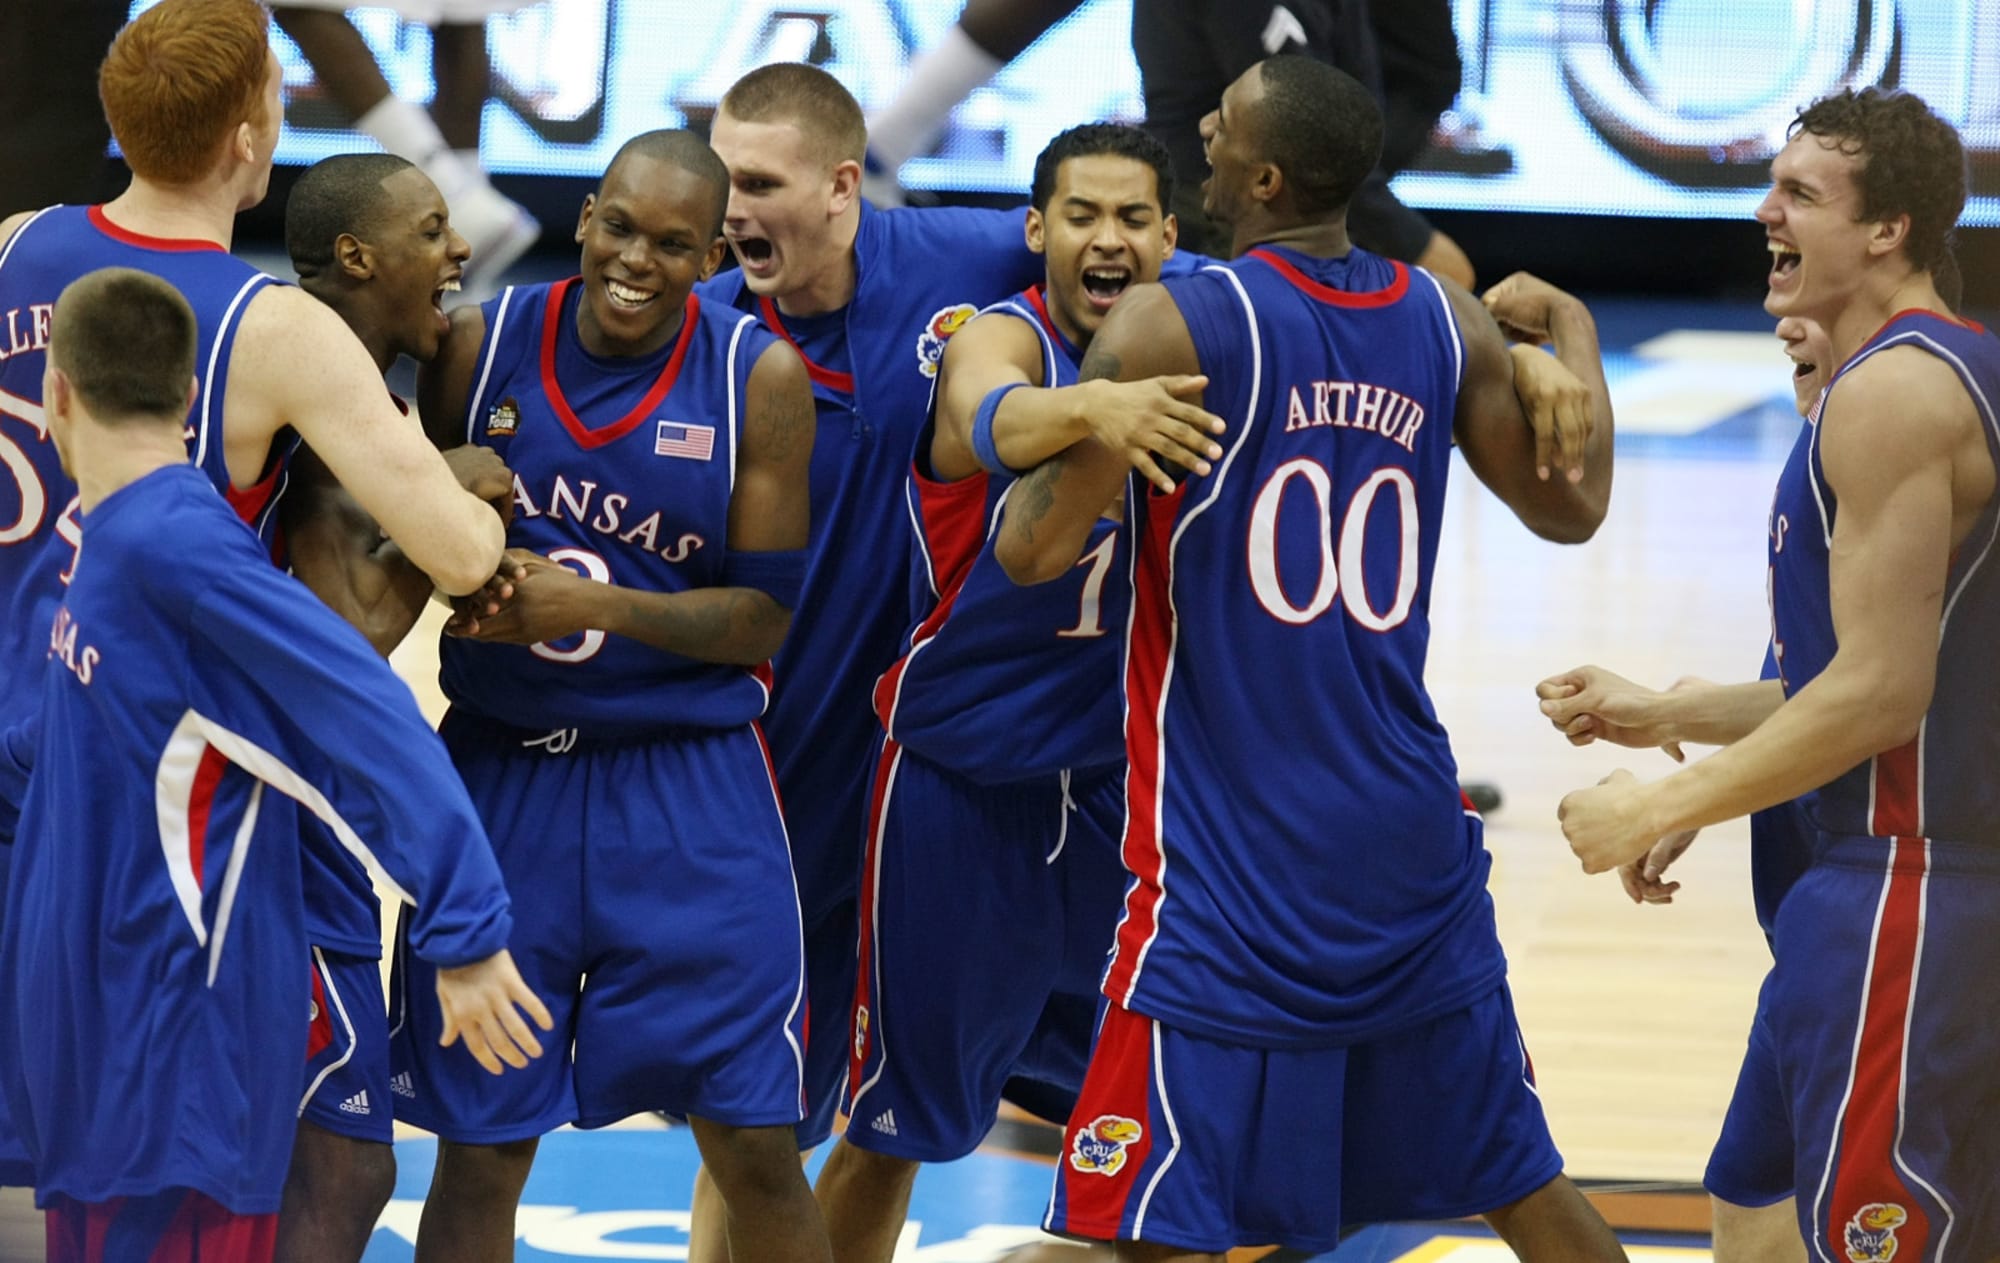 Kansas basketball How to watch the 2008 national title game today